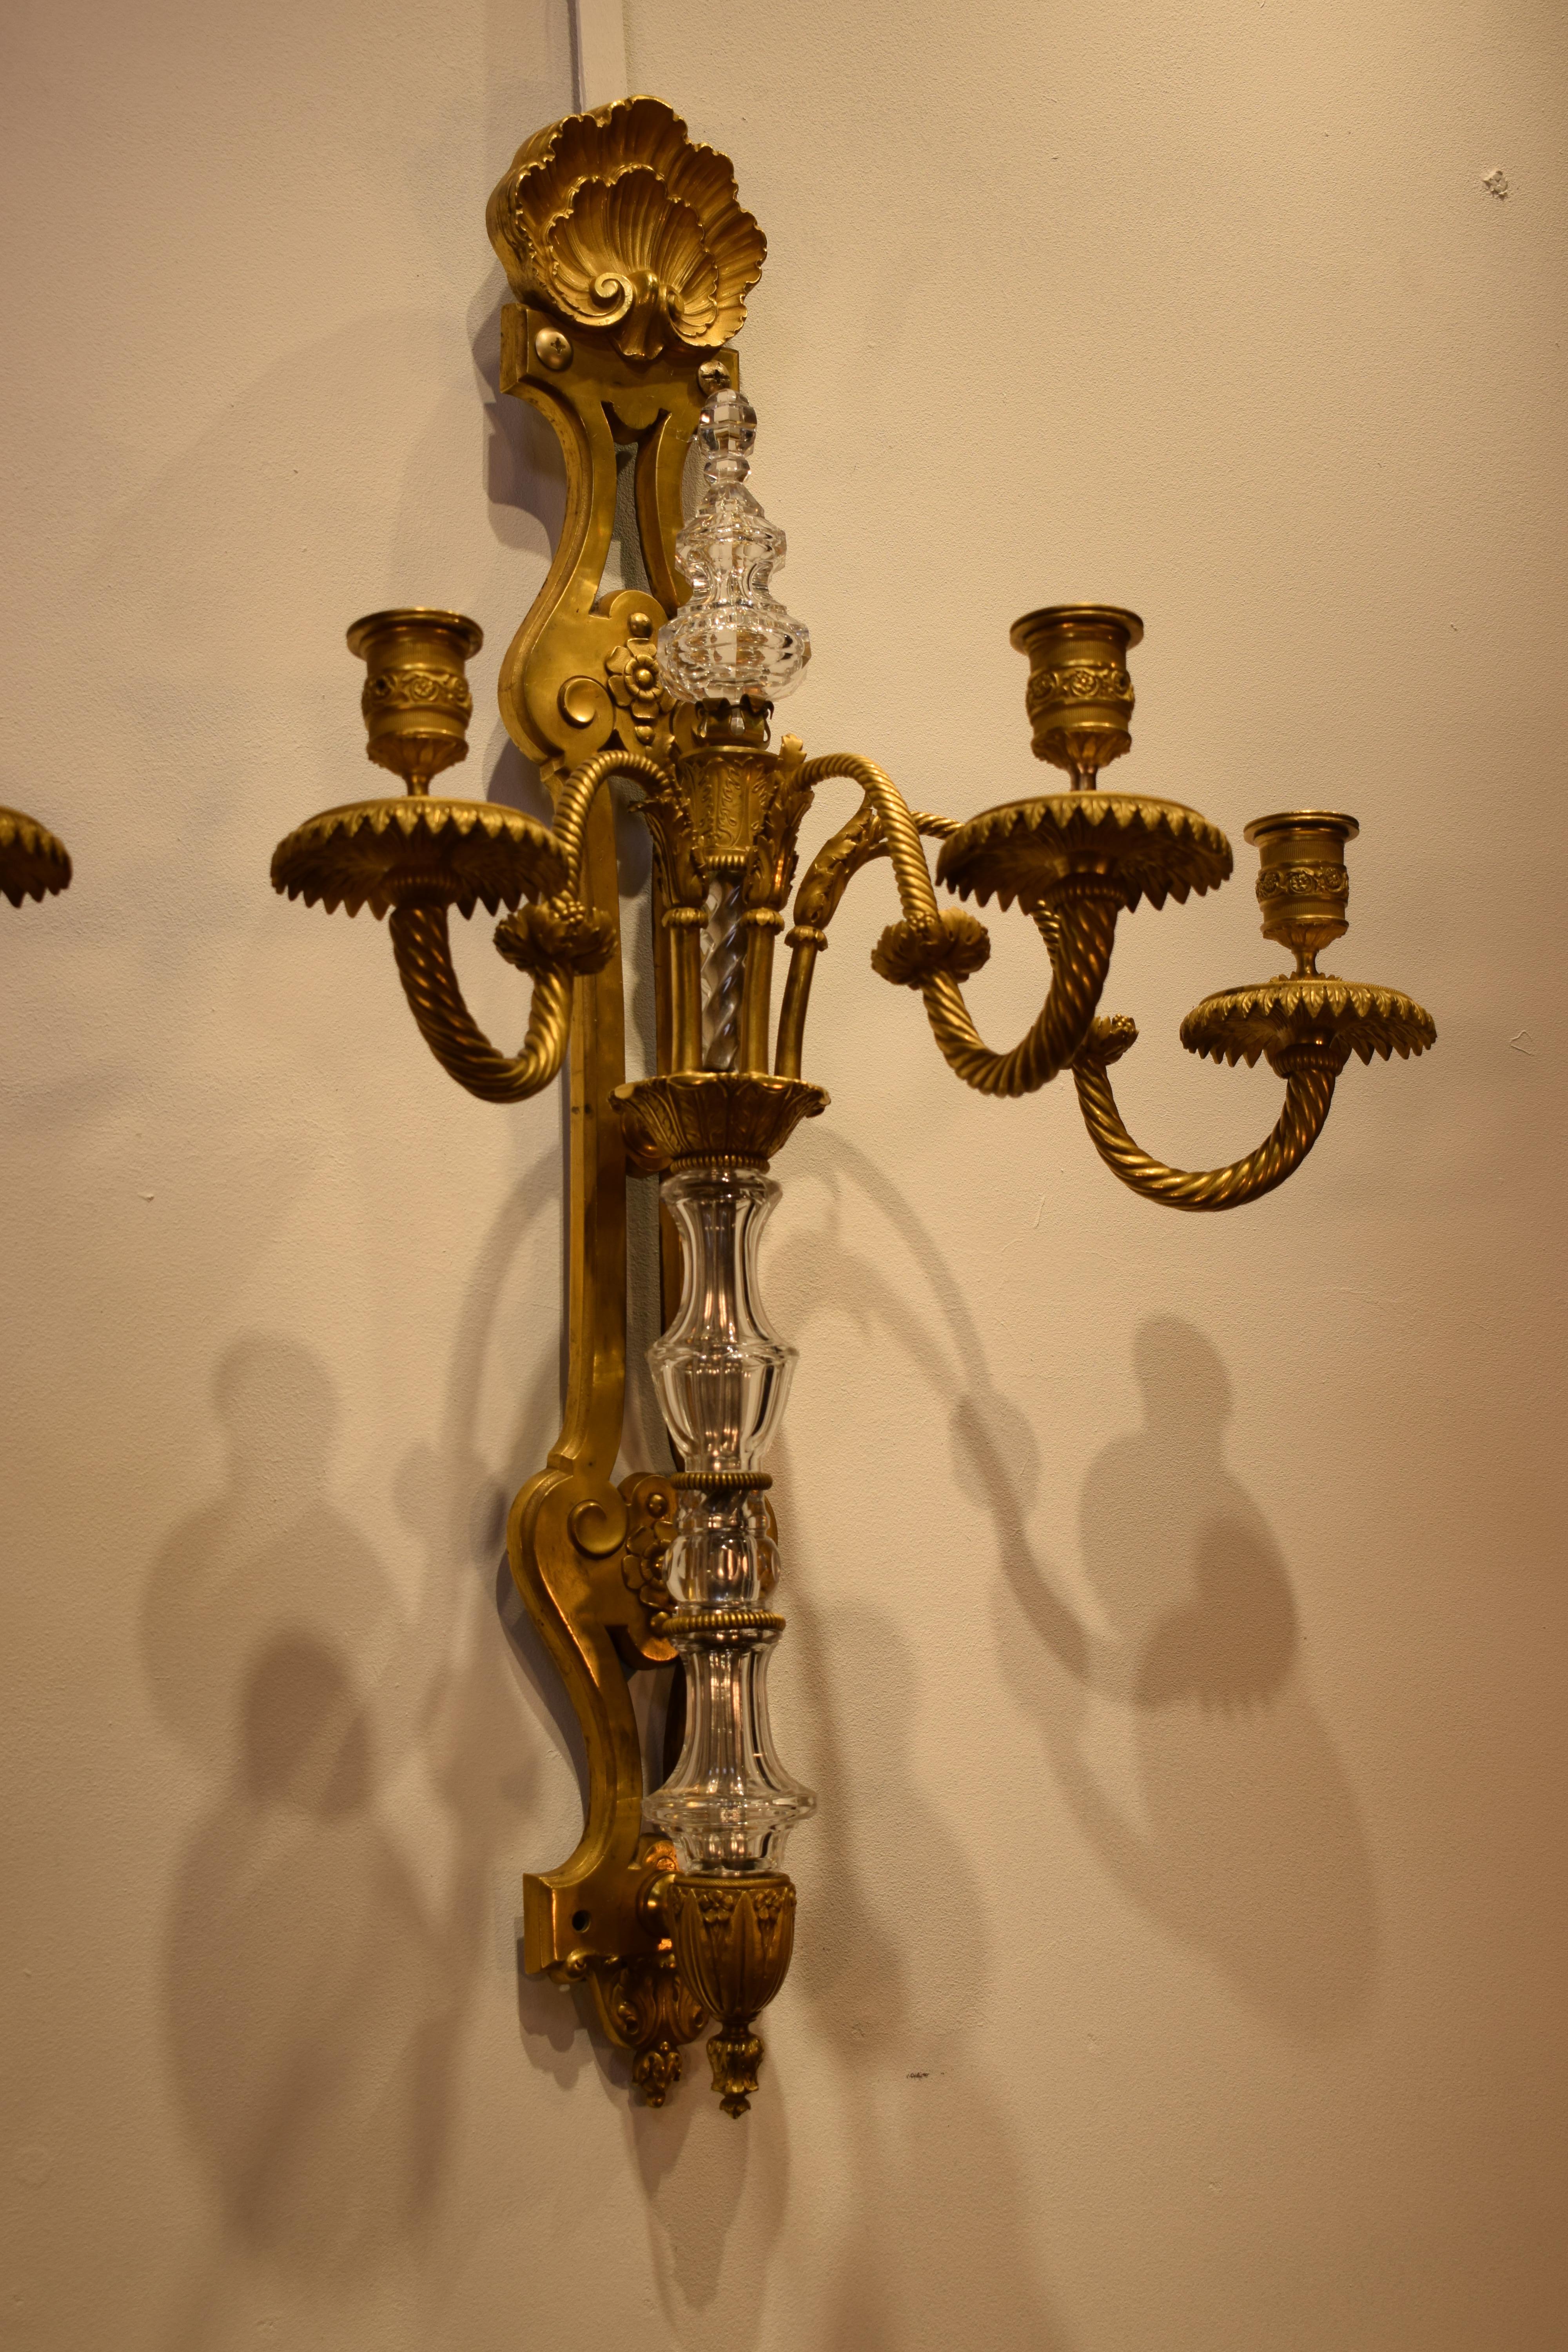 A Magnificent Pair of Gilt Bronze Wall Sconces in the Louis XVI style. The body featuring hand cut crystal parts & pyramid. An Exquisite Shell on top. Three lights each. France, circa 1890. 
Dimensions: Height 27 1/2